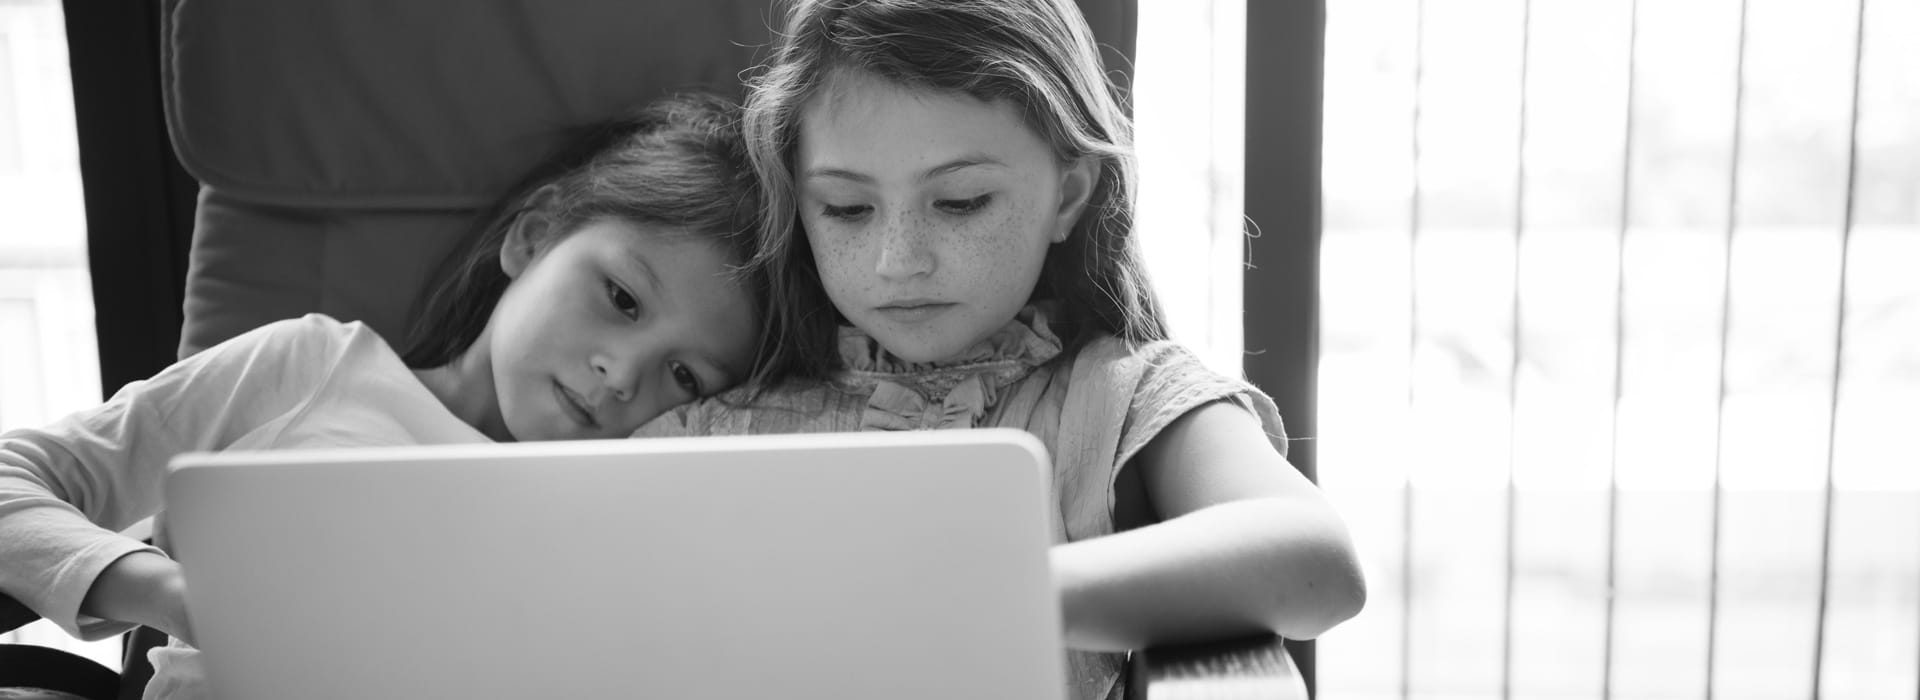 Tips To Keeping Your Child Safe Online